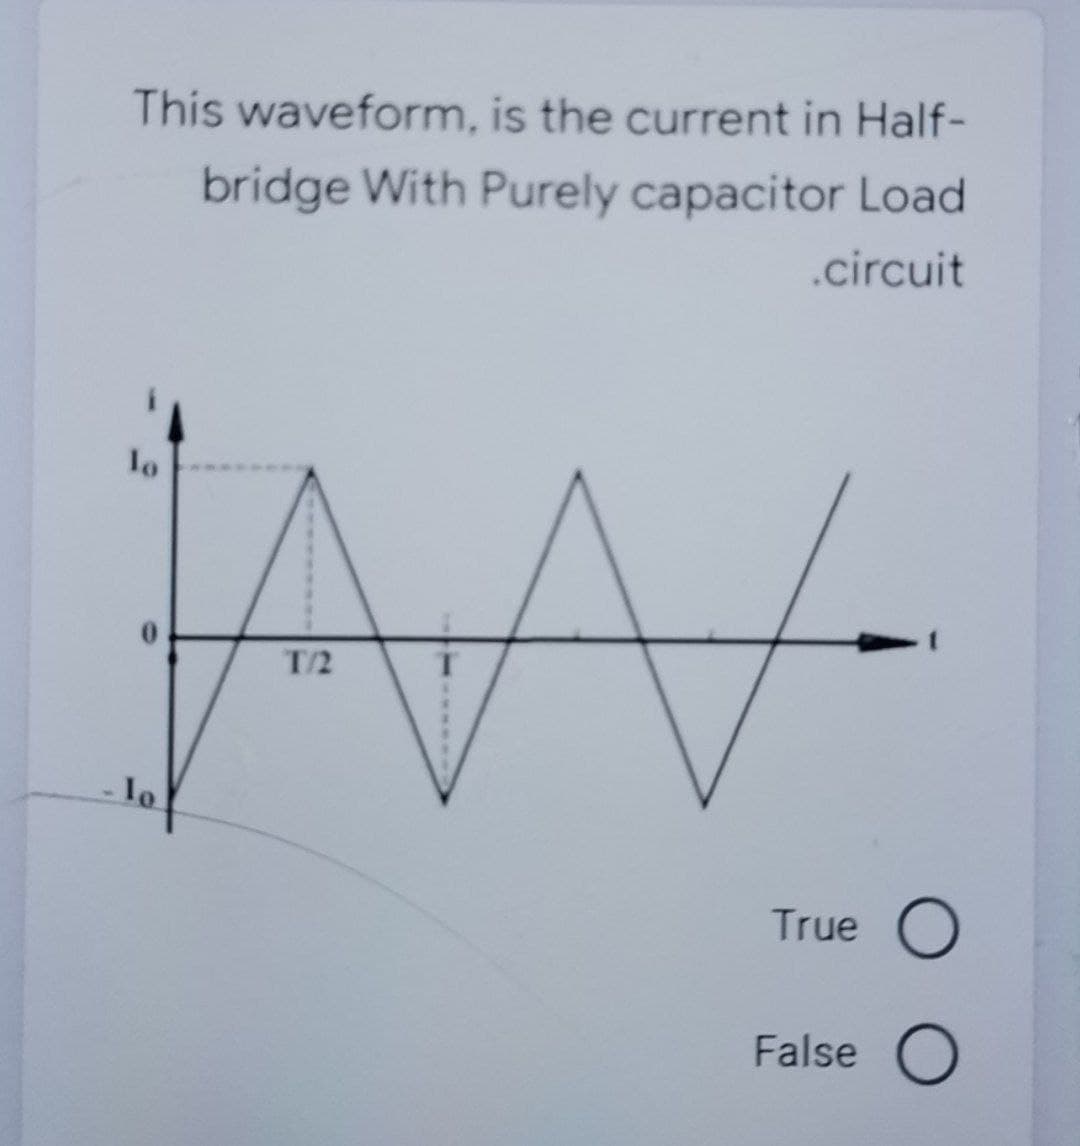 This waveform, is the current in Half-
bridge With Purely capacitor Load
.circuit
lo
0.
T/2
lo
True O
False O
